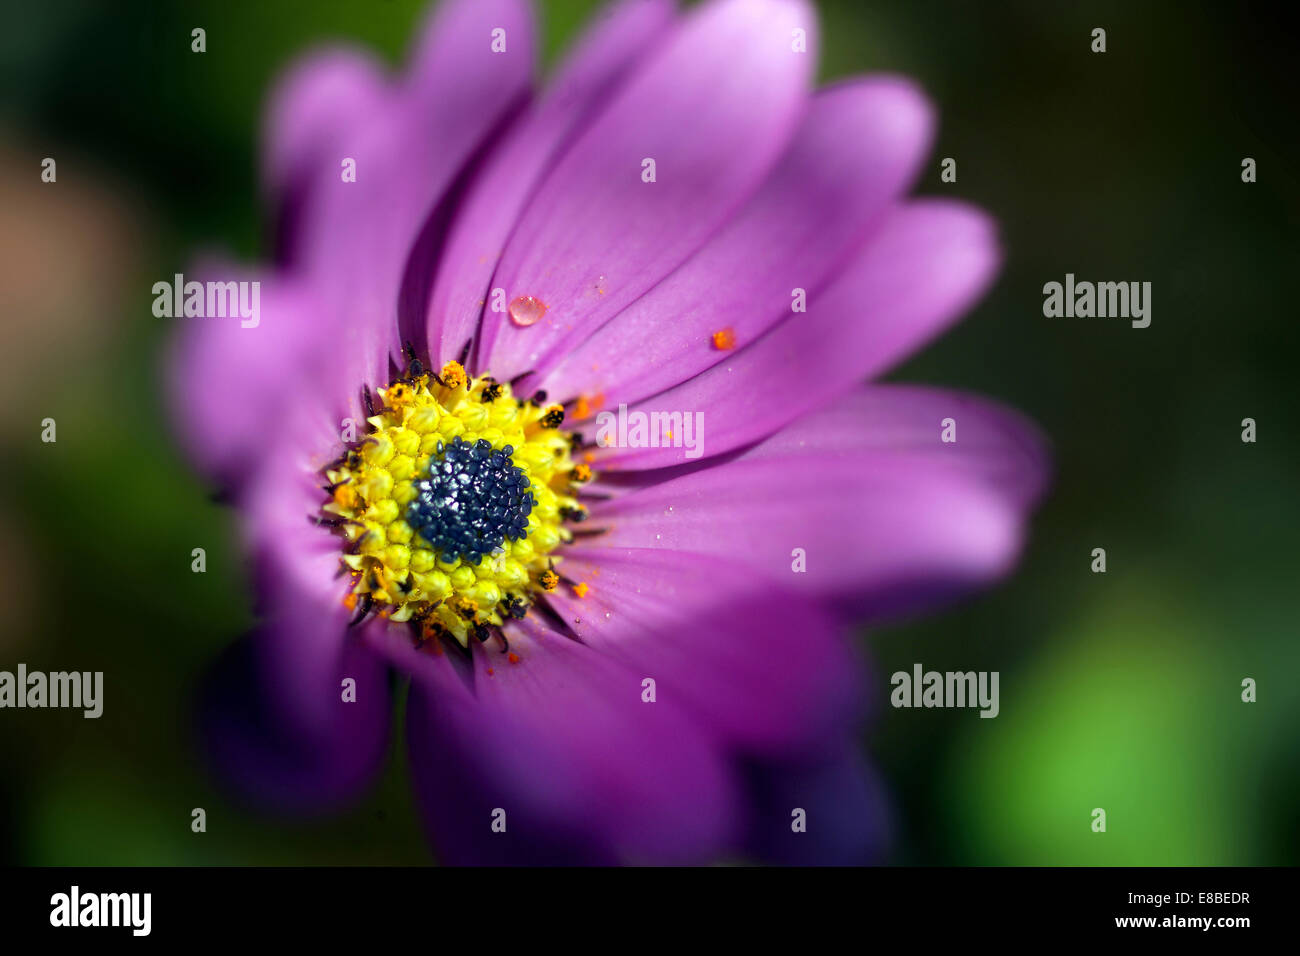 Purple garden flower with yellow centre - Aster Stock Photo